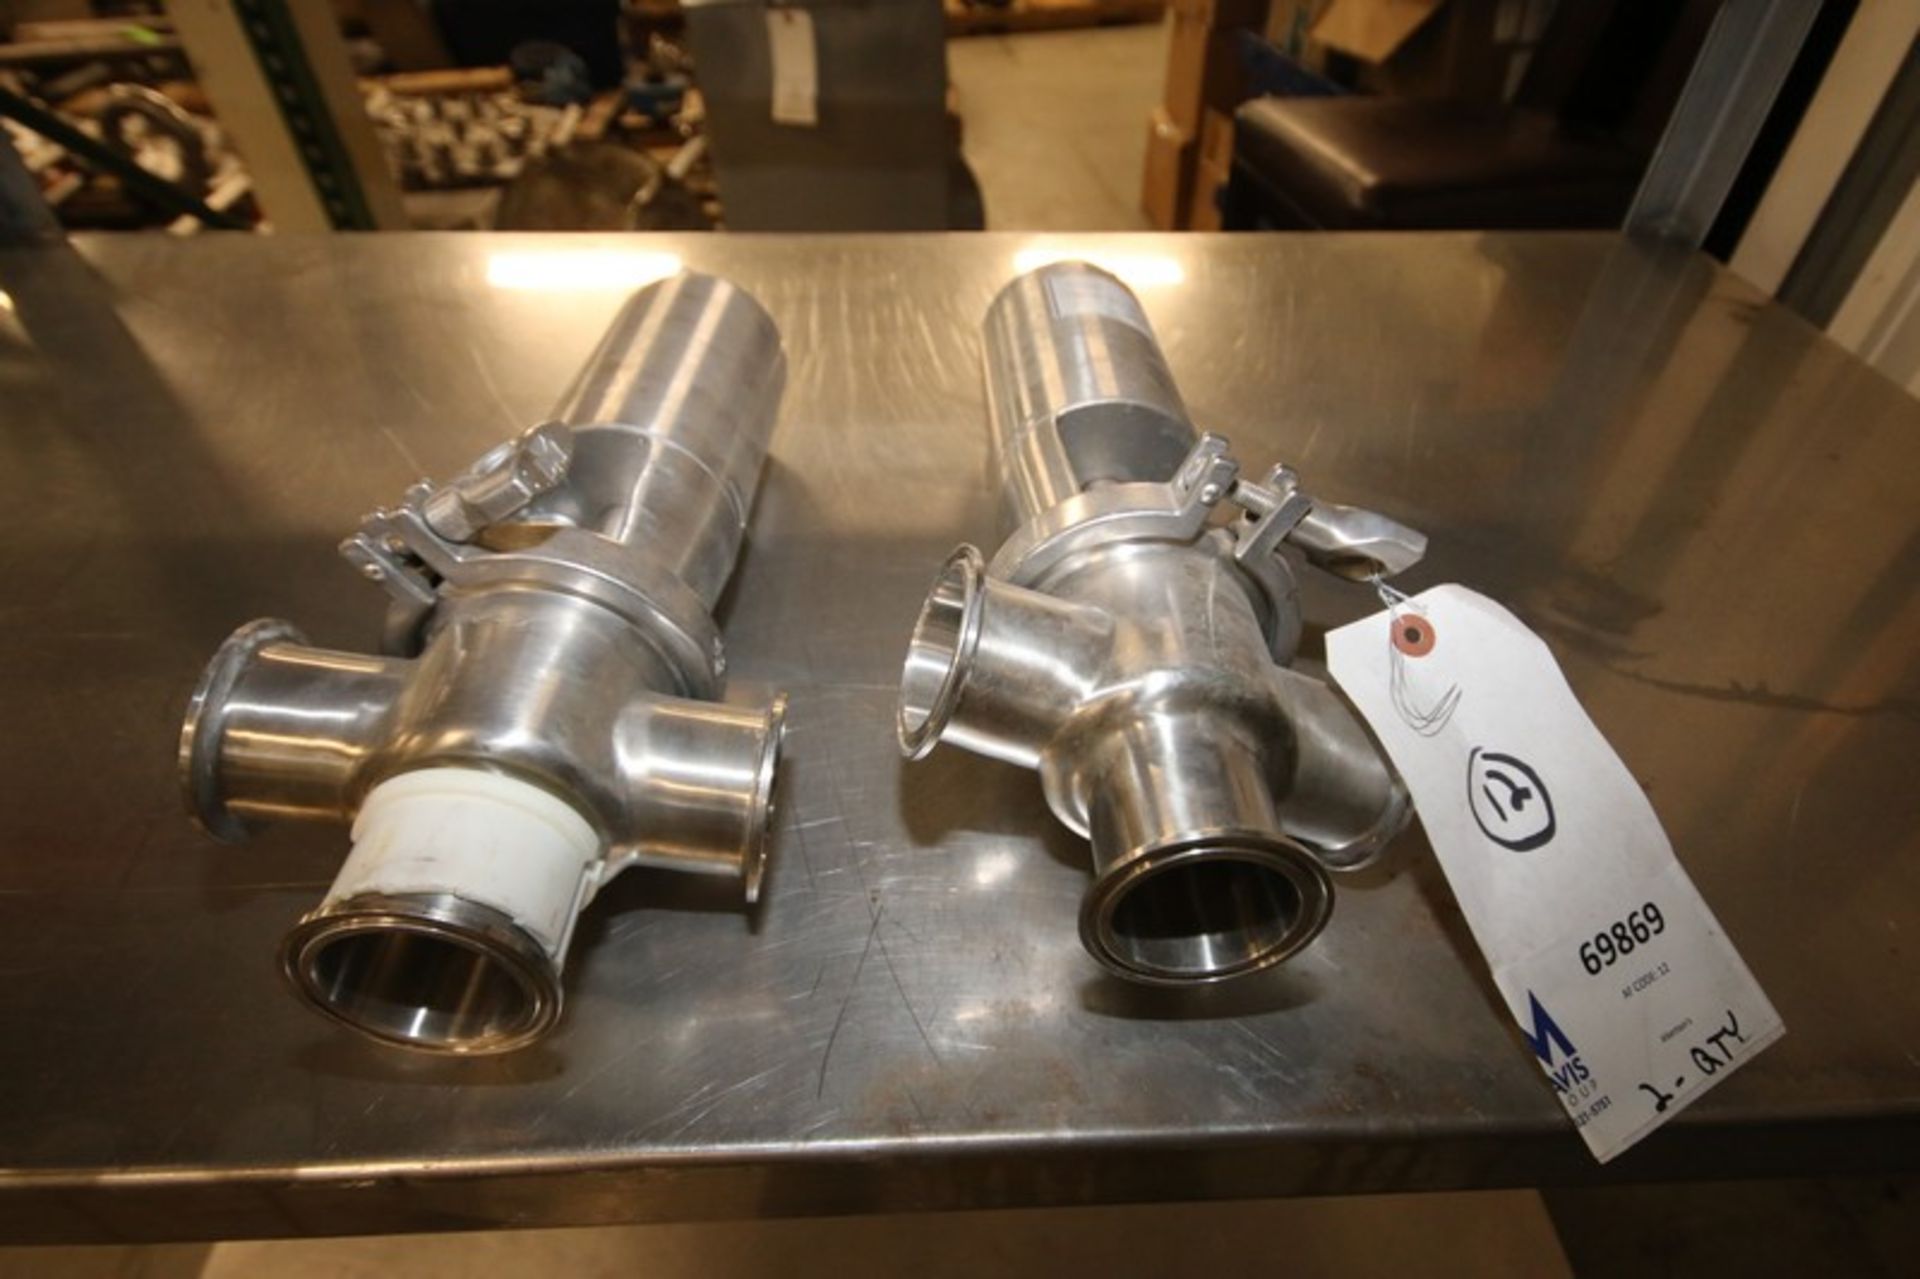 Lot of (2) Alfa Laval 2" 3-Way S/S Air Valve, Clamp Type, ( Cross Body Type), (INV#69869) (Located @